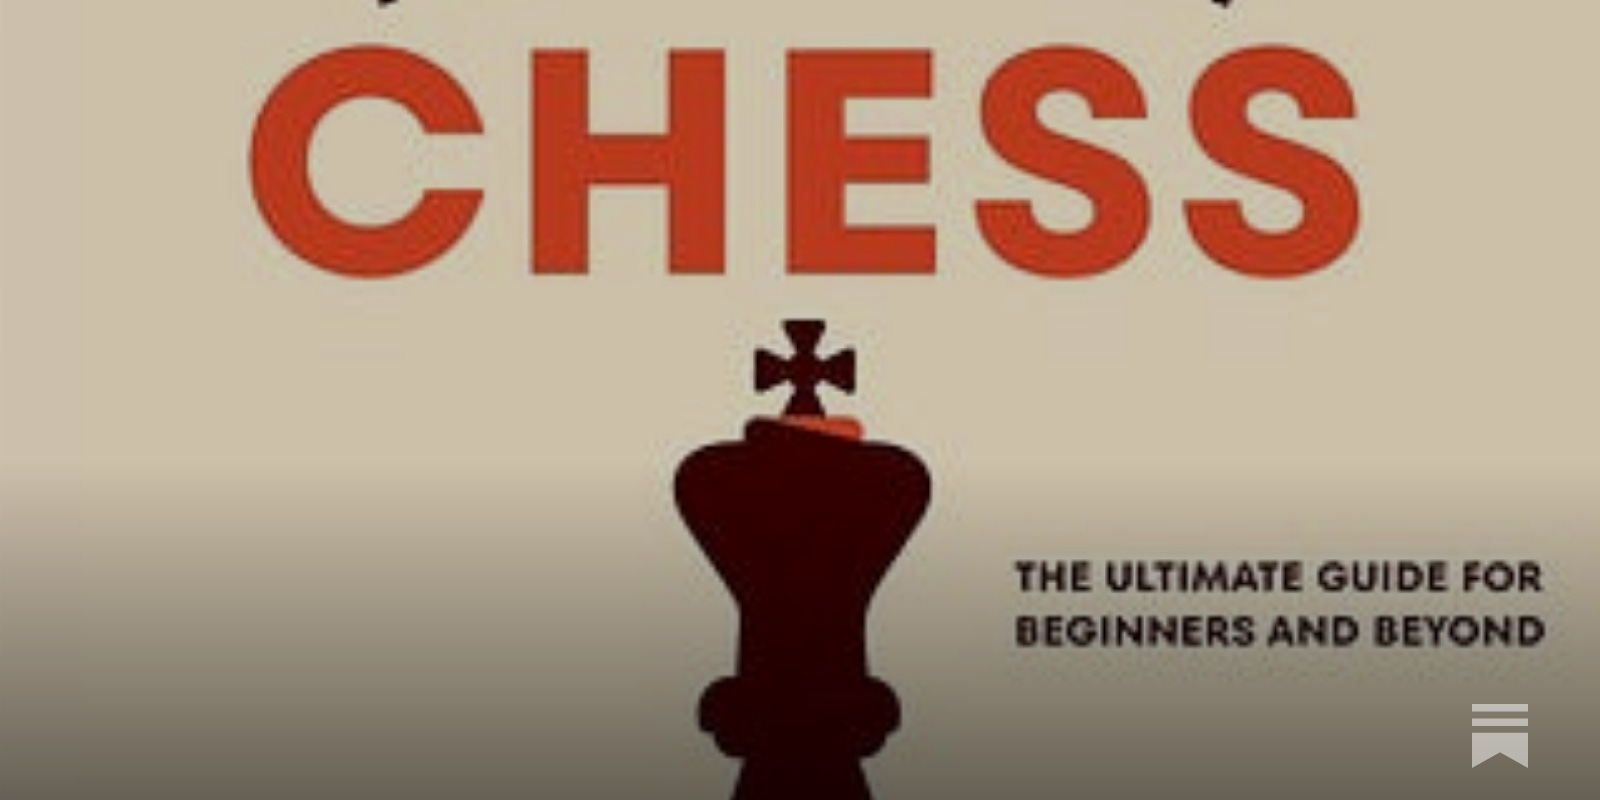 Book Review  Levy Rozman (GothamChess), How to Win at Chess – Adventures  of a Chess Noob